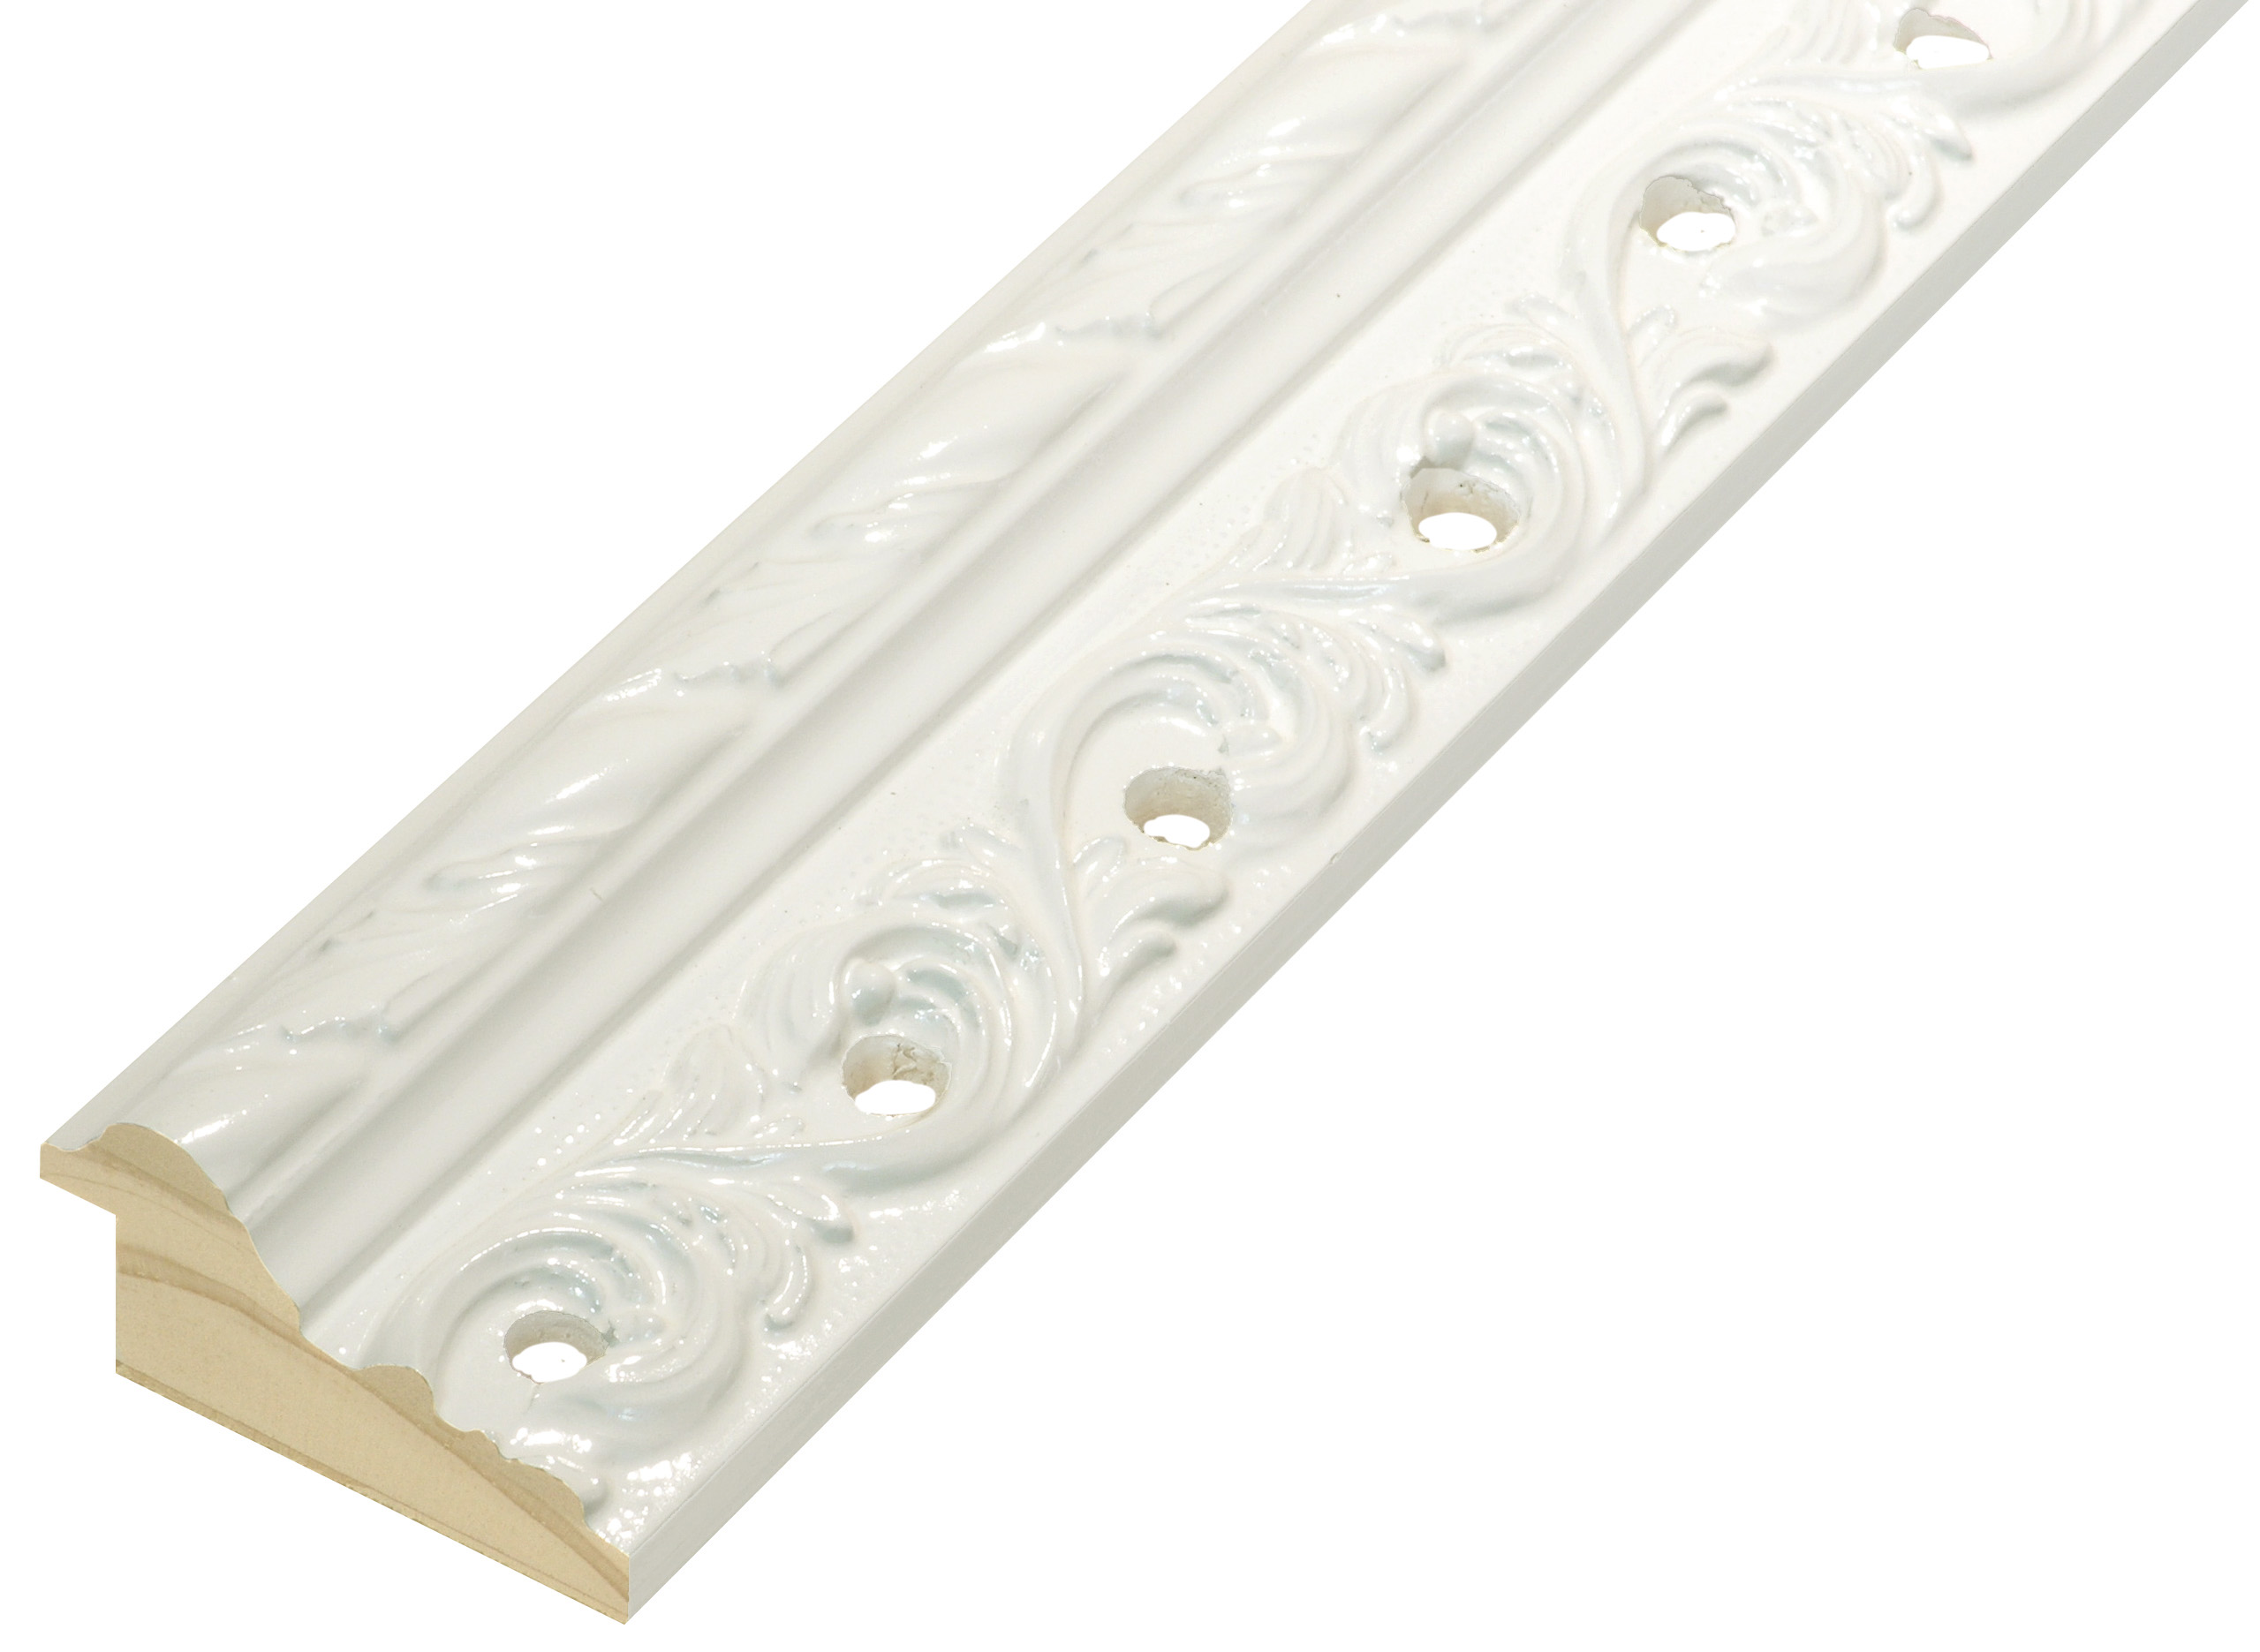 Moulding finger-jointed pine 48mm wide - white, holes and decoratiions